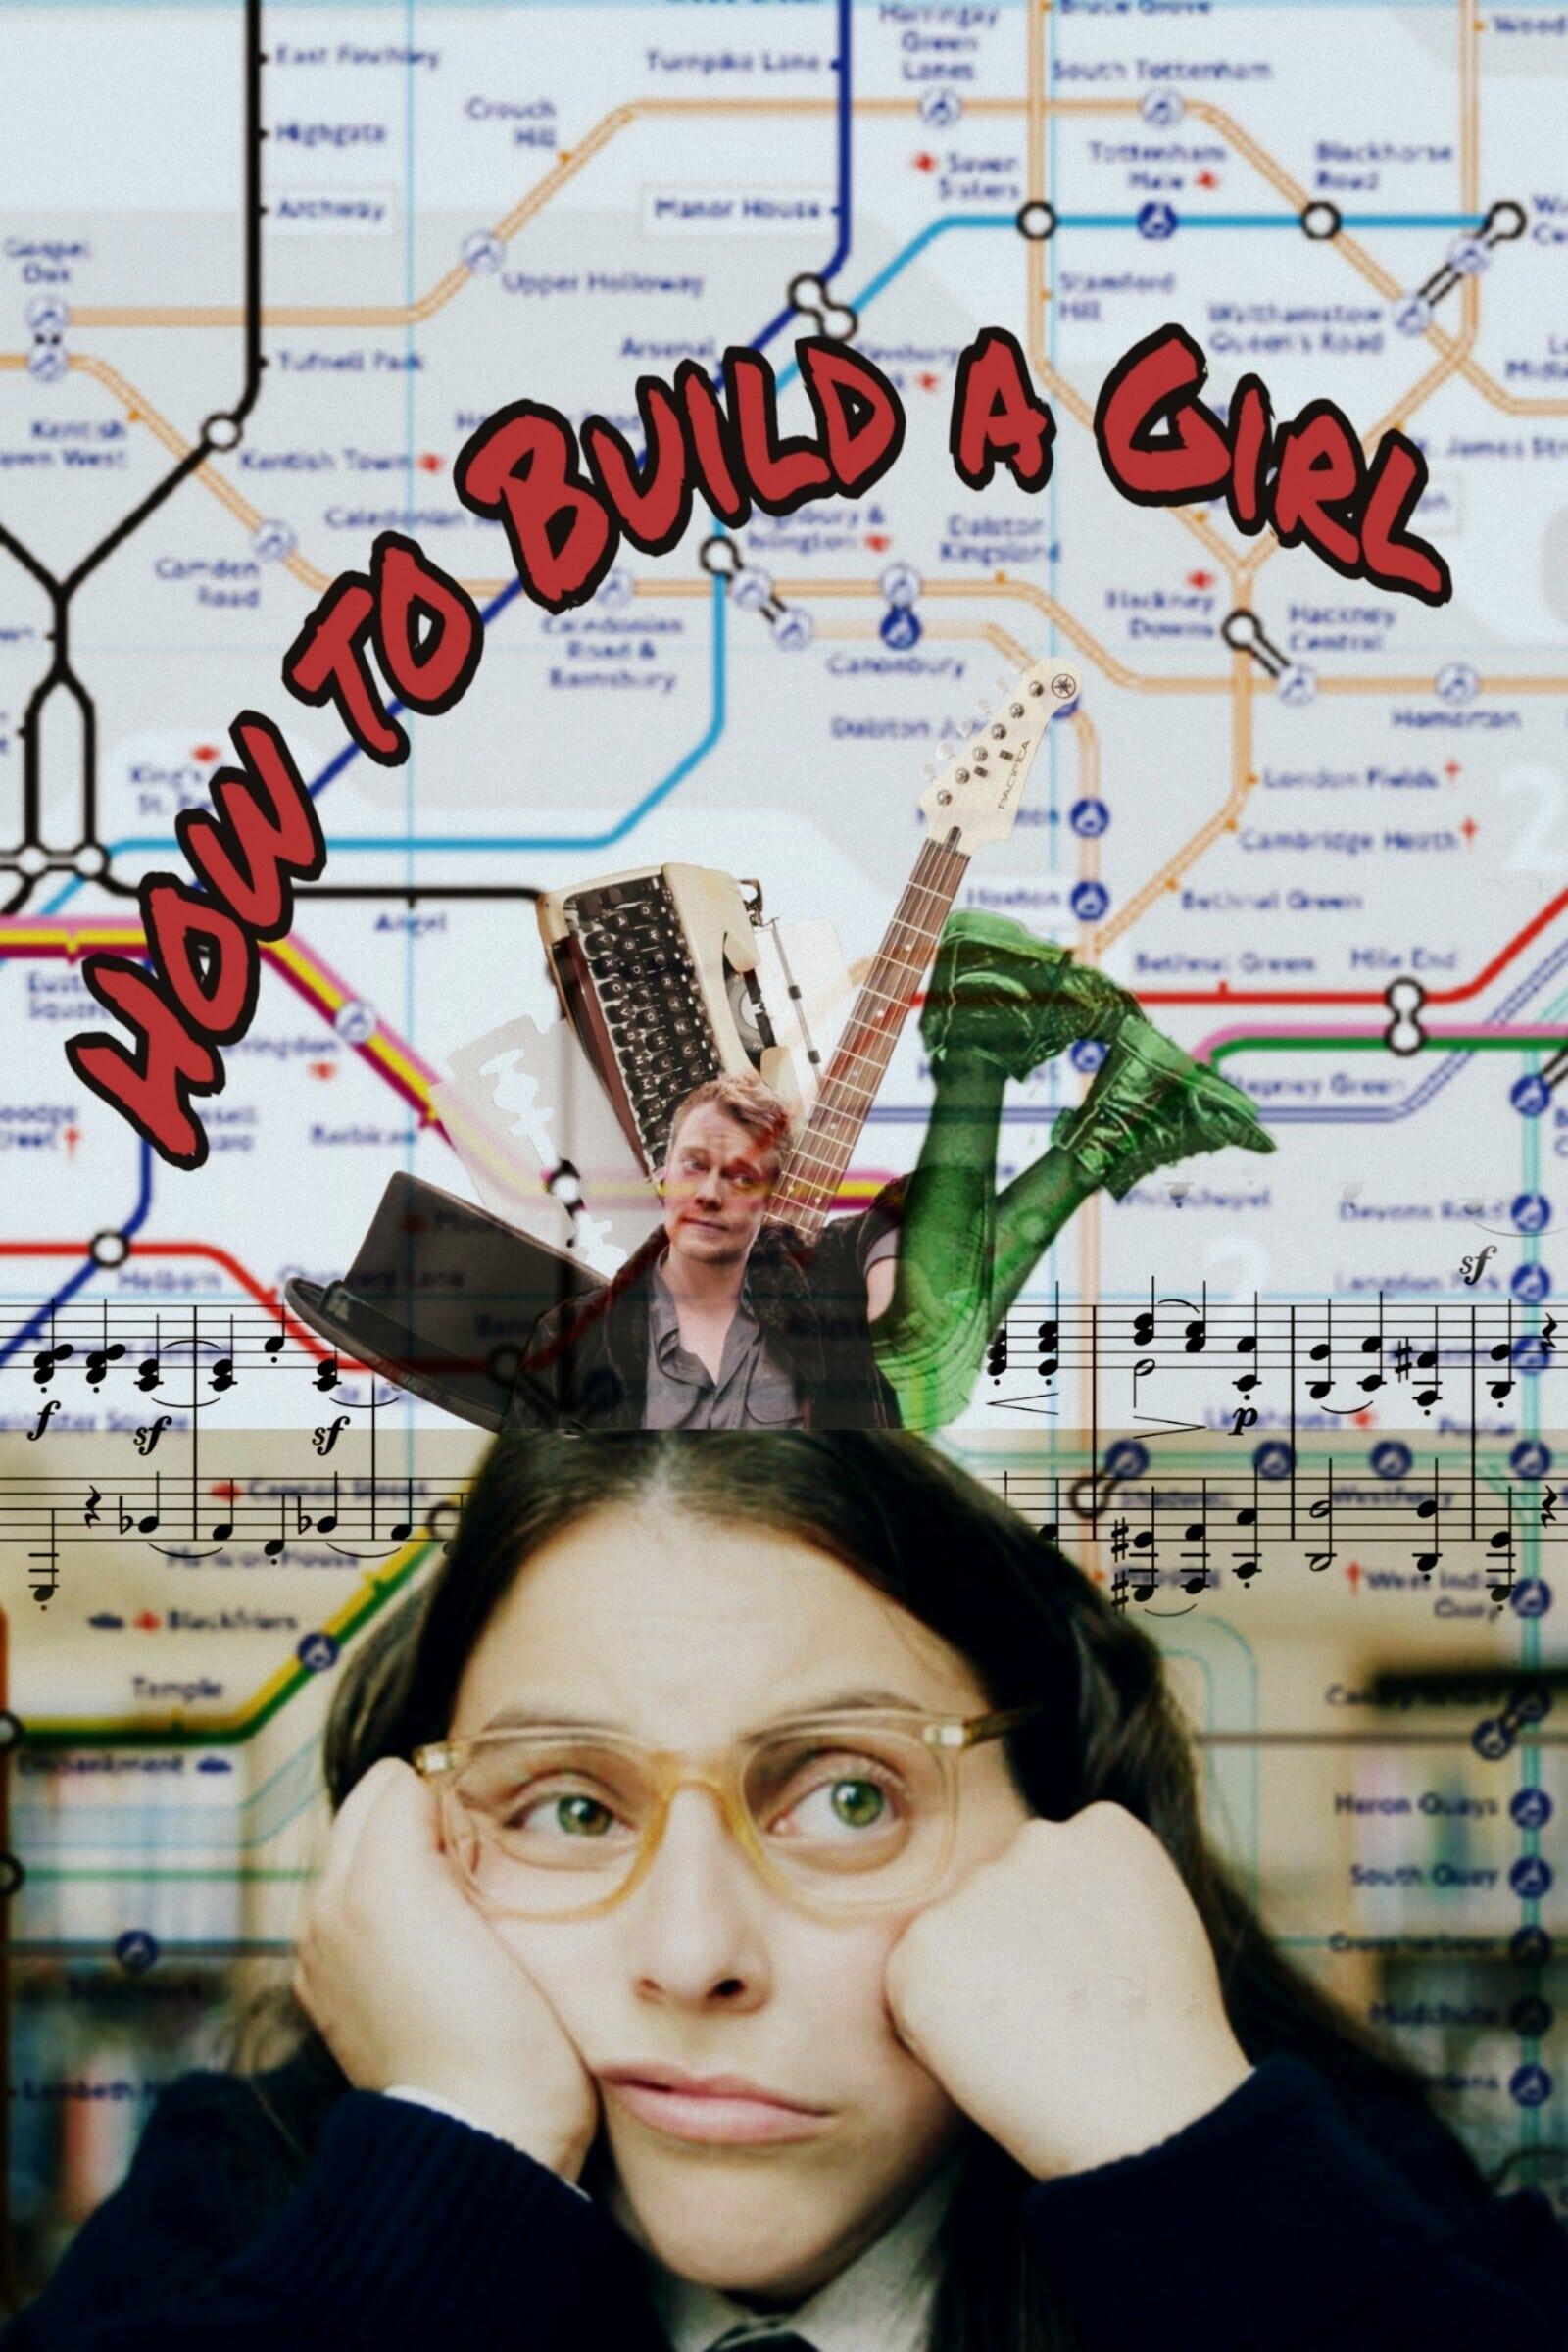 How to Build a Girl poster